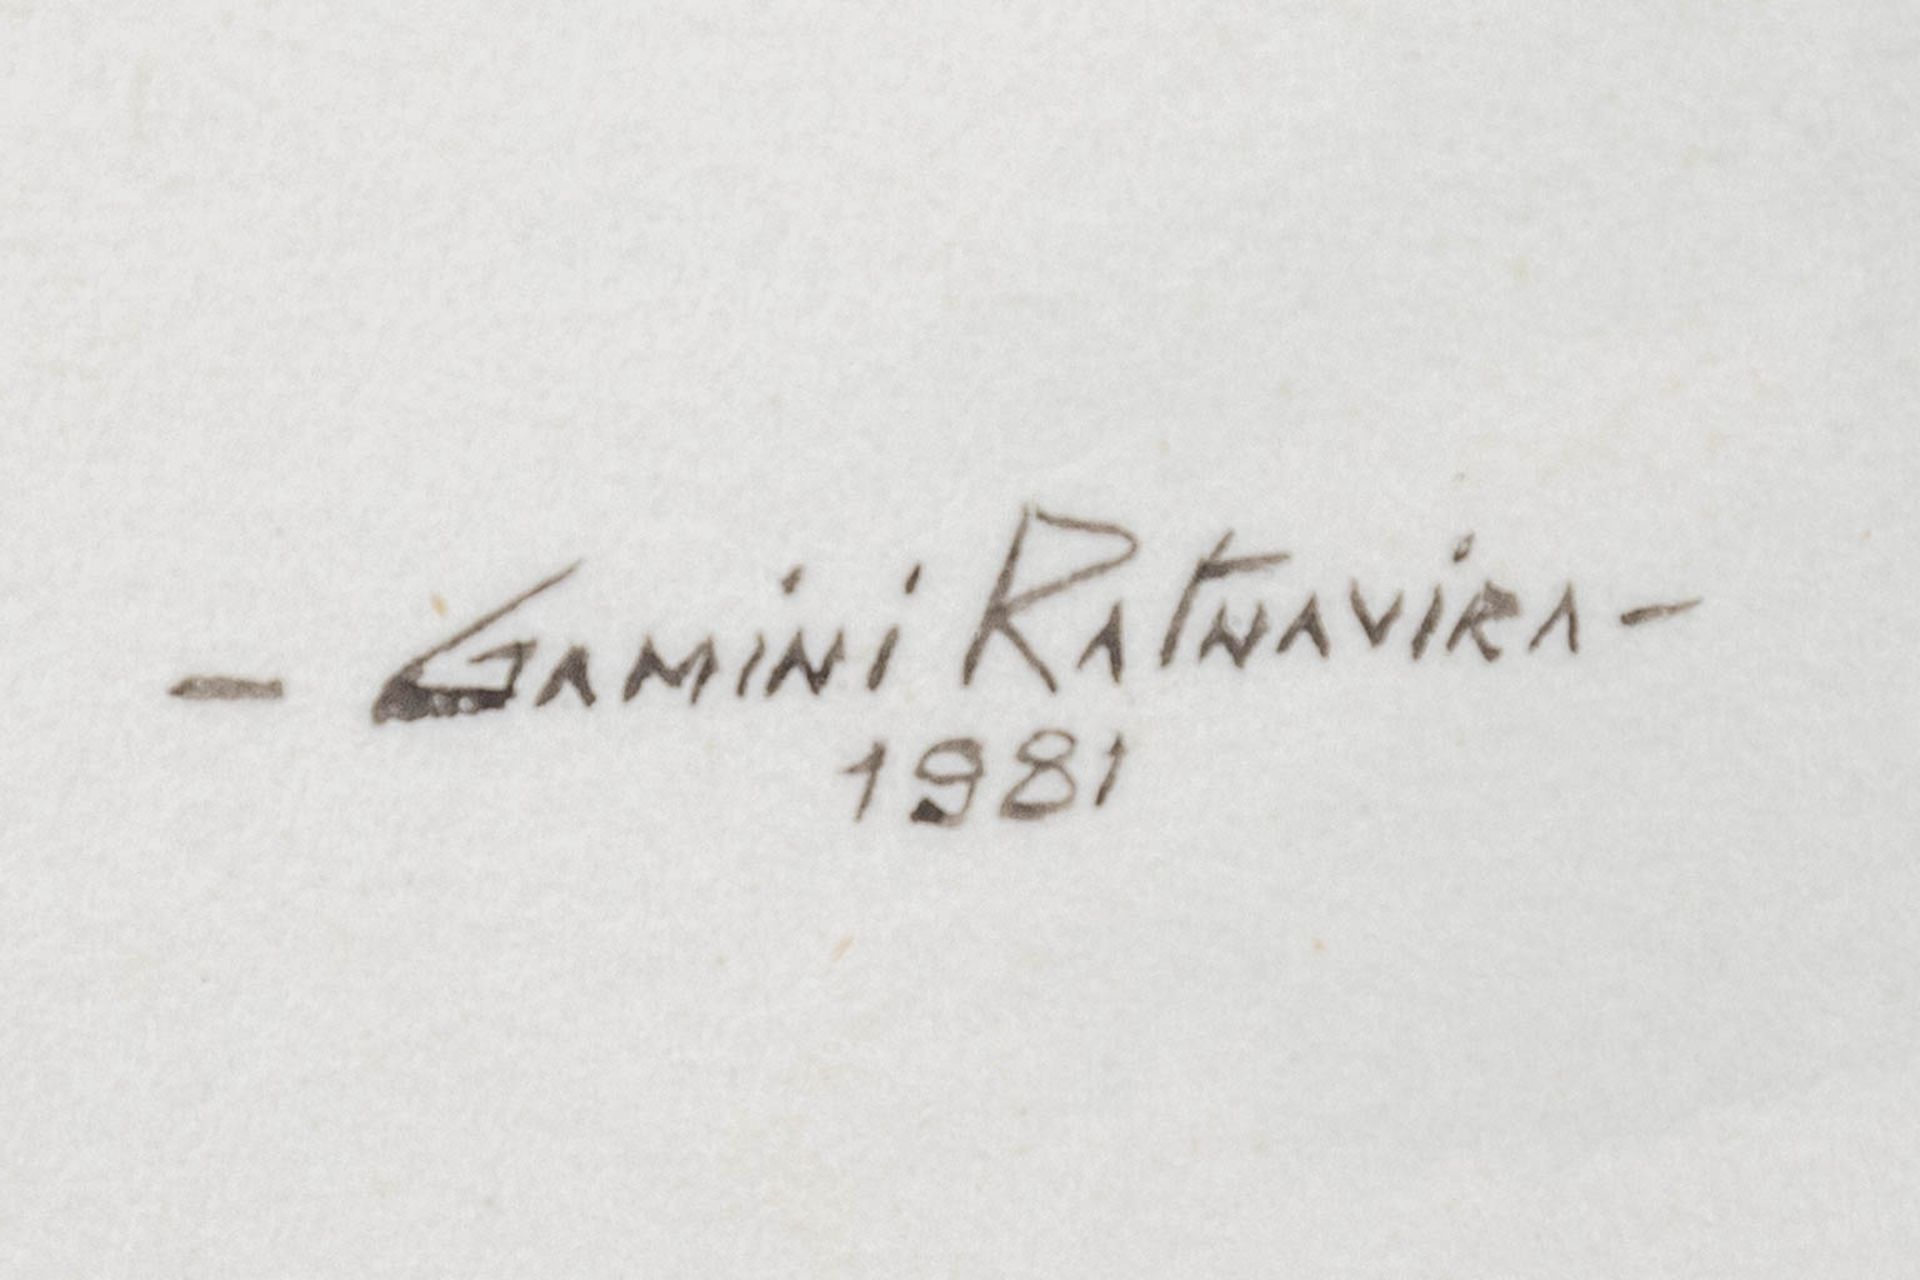 Gamini P. RATNAVIRA (1949) a collection of 4 drawings, watercolour on paper. (W: 26 x H: 34 cm) - Image 13 of 24